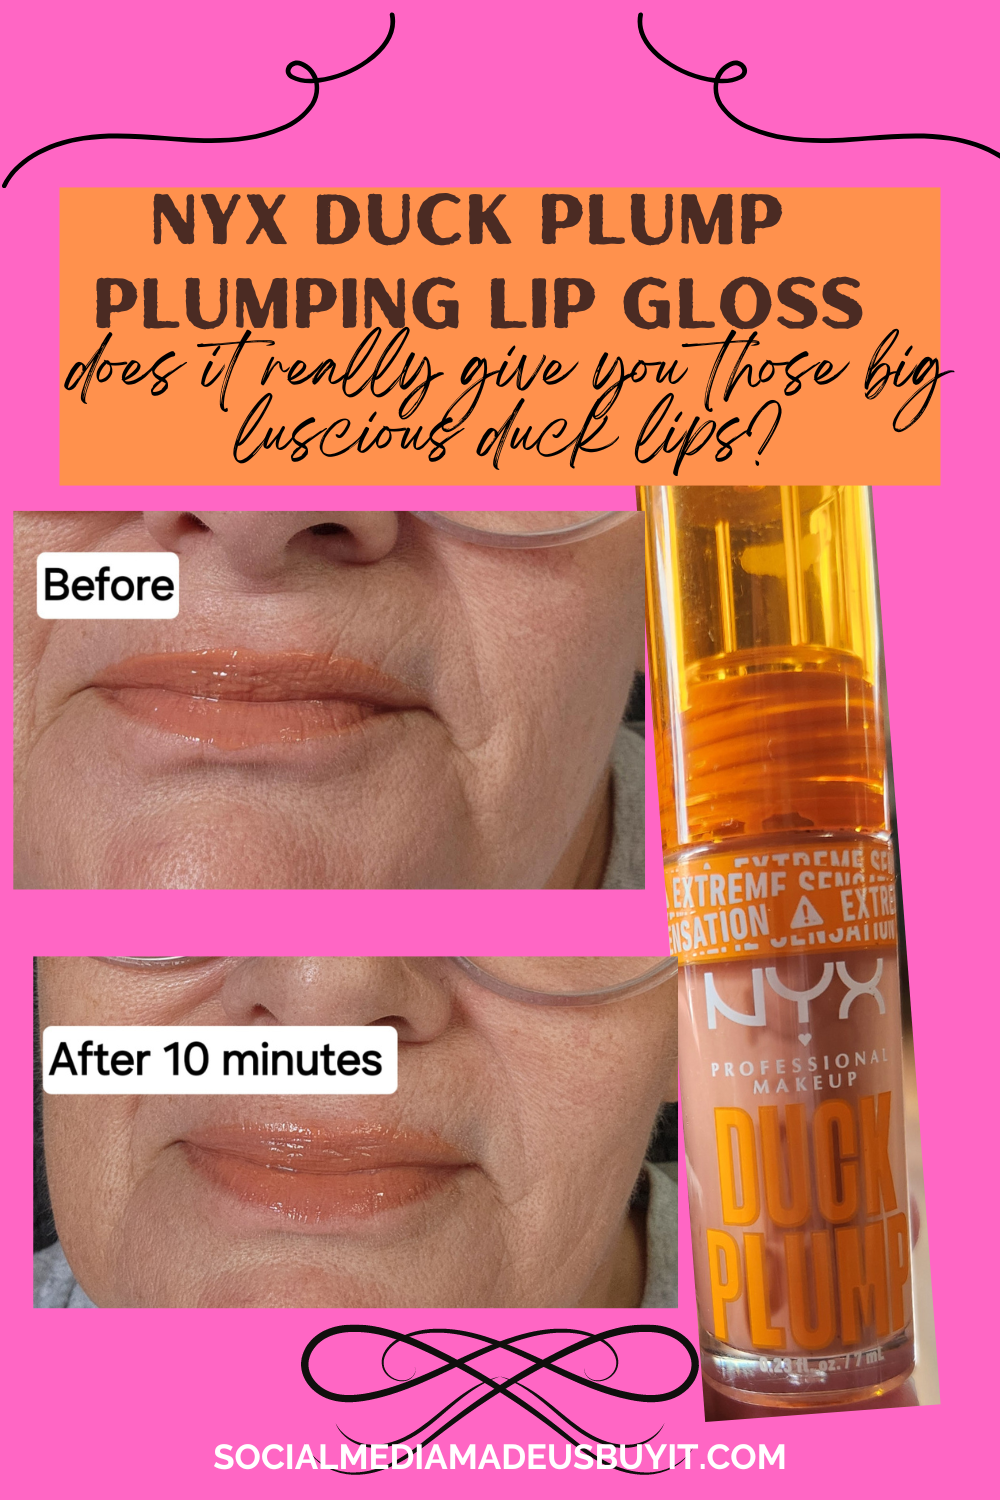 I Tried the $13 Viral ‘Duck Lips’ Plumping Gloss But Did It Give Me a Dramatically Fuller Pout?